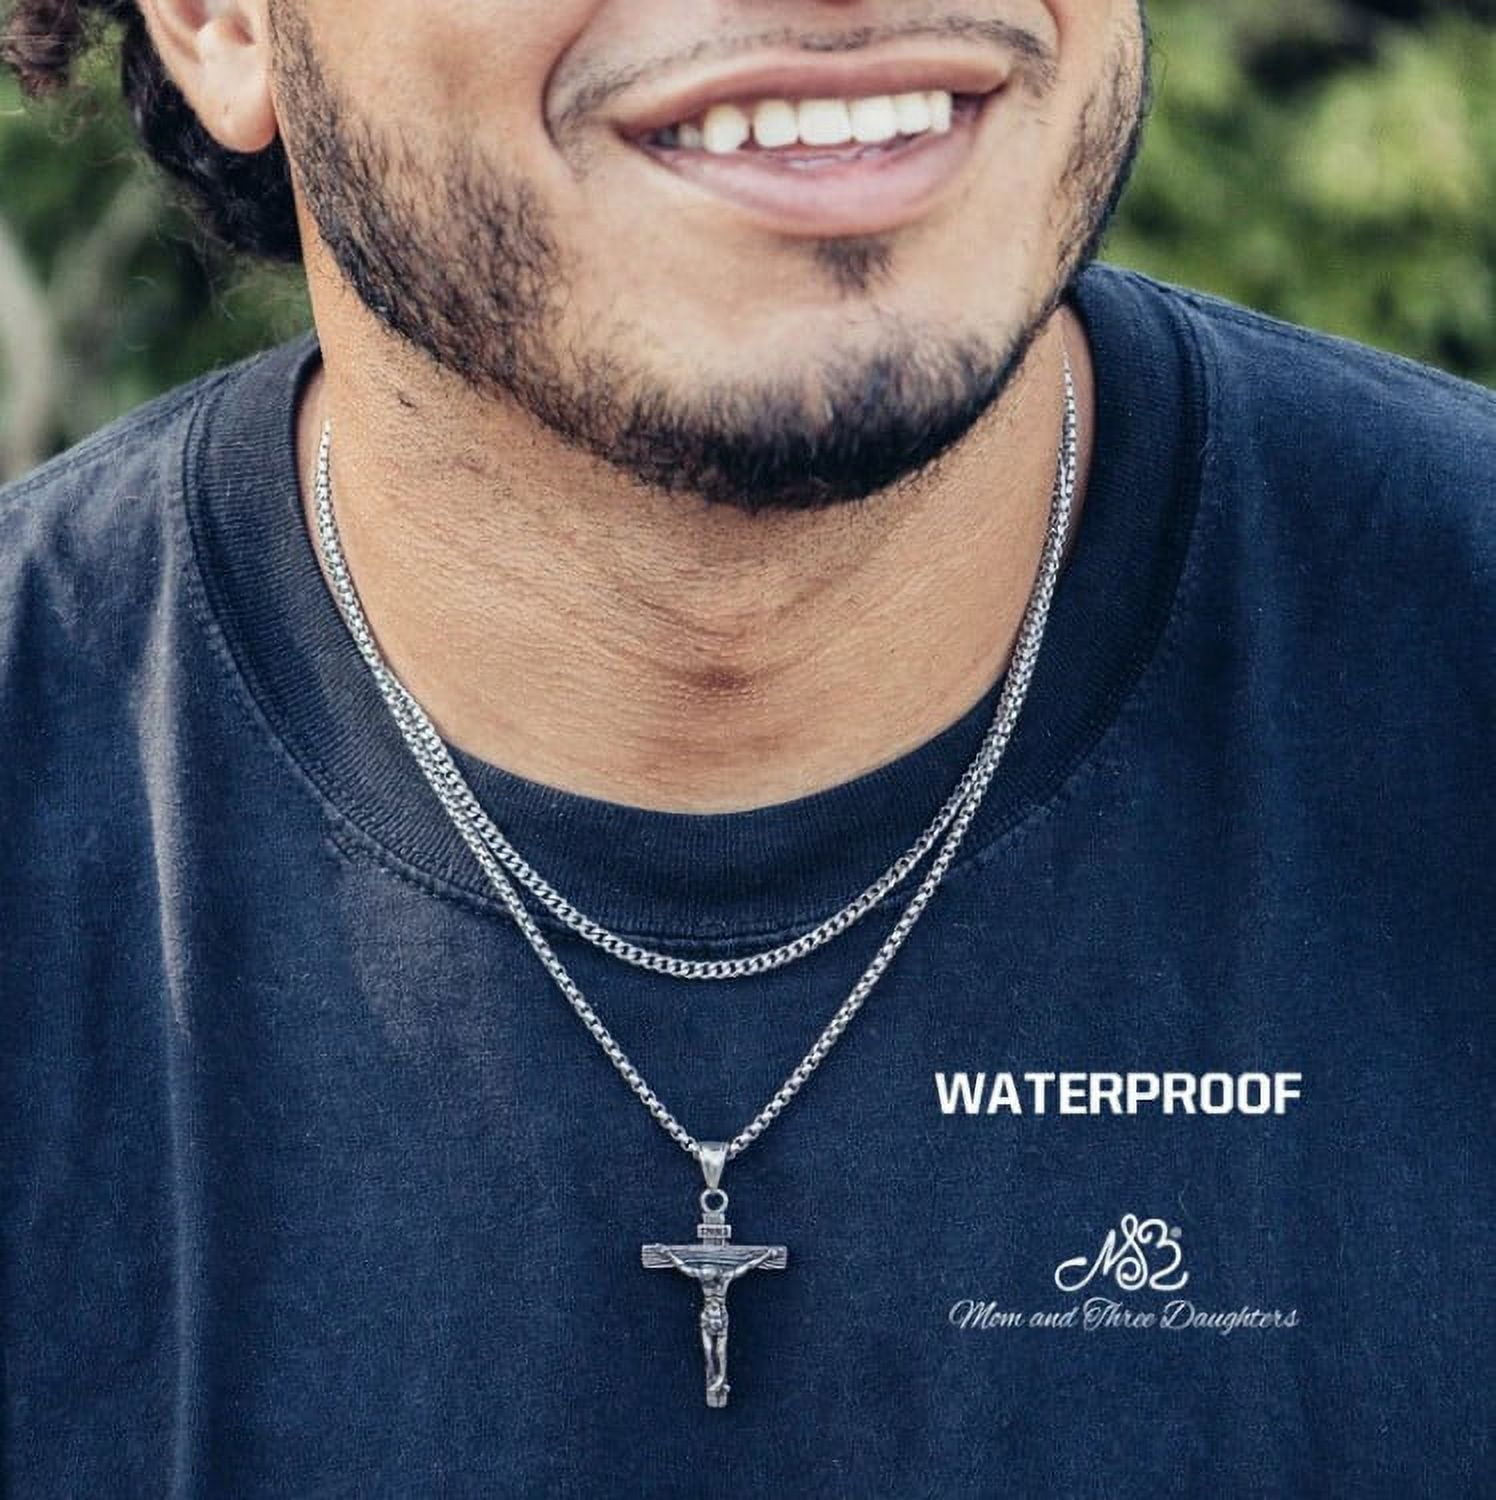 Waterproof Cross Necklaces For Men Male Gifts Jewelry, Anti Allergy 14K  White Gold Plain Cross Pendant With Rope Chain From Gojewelry, $61.94 |  DHgate.Com